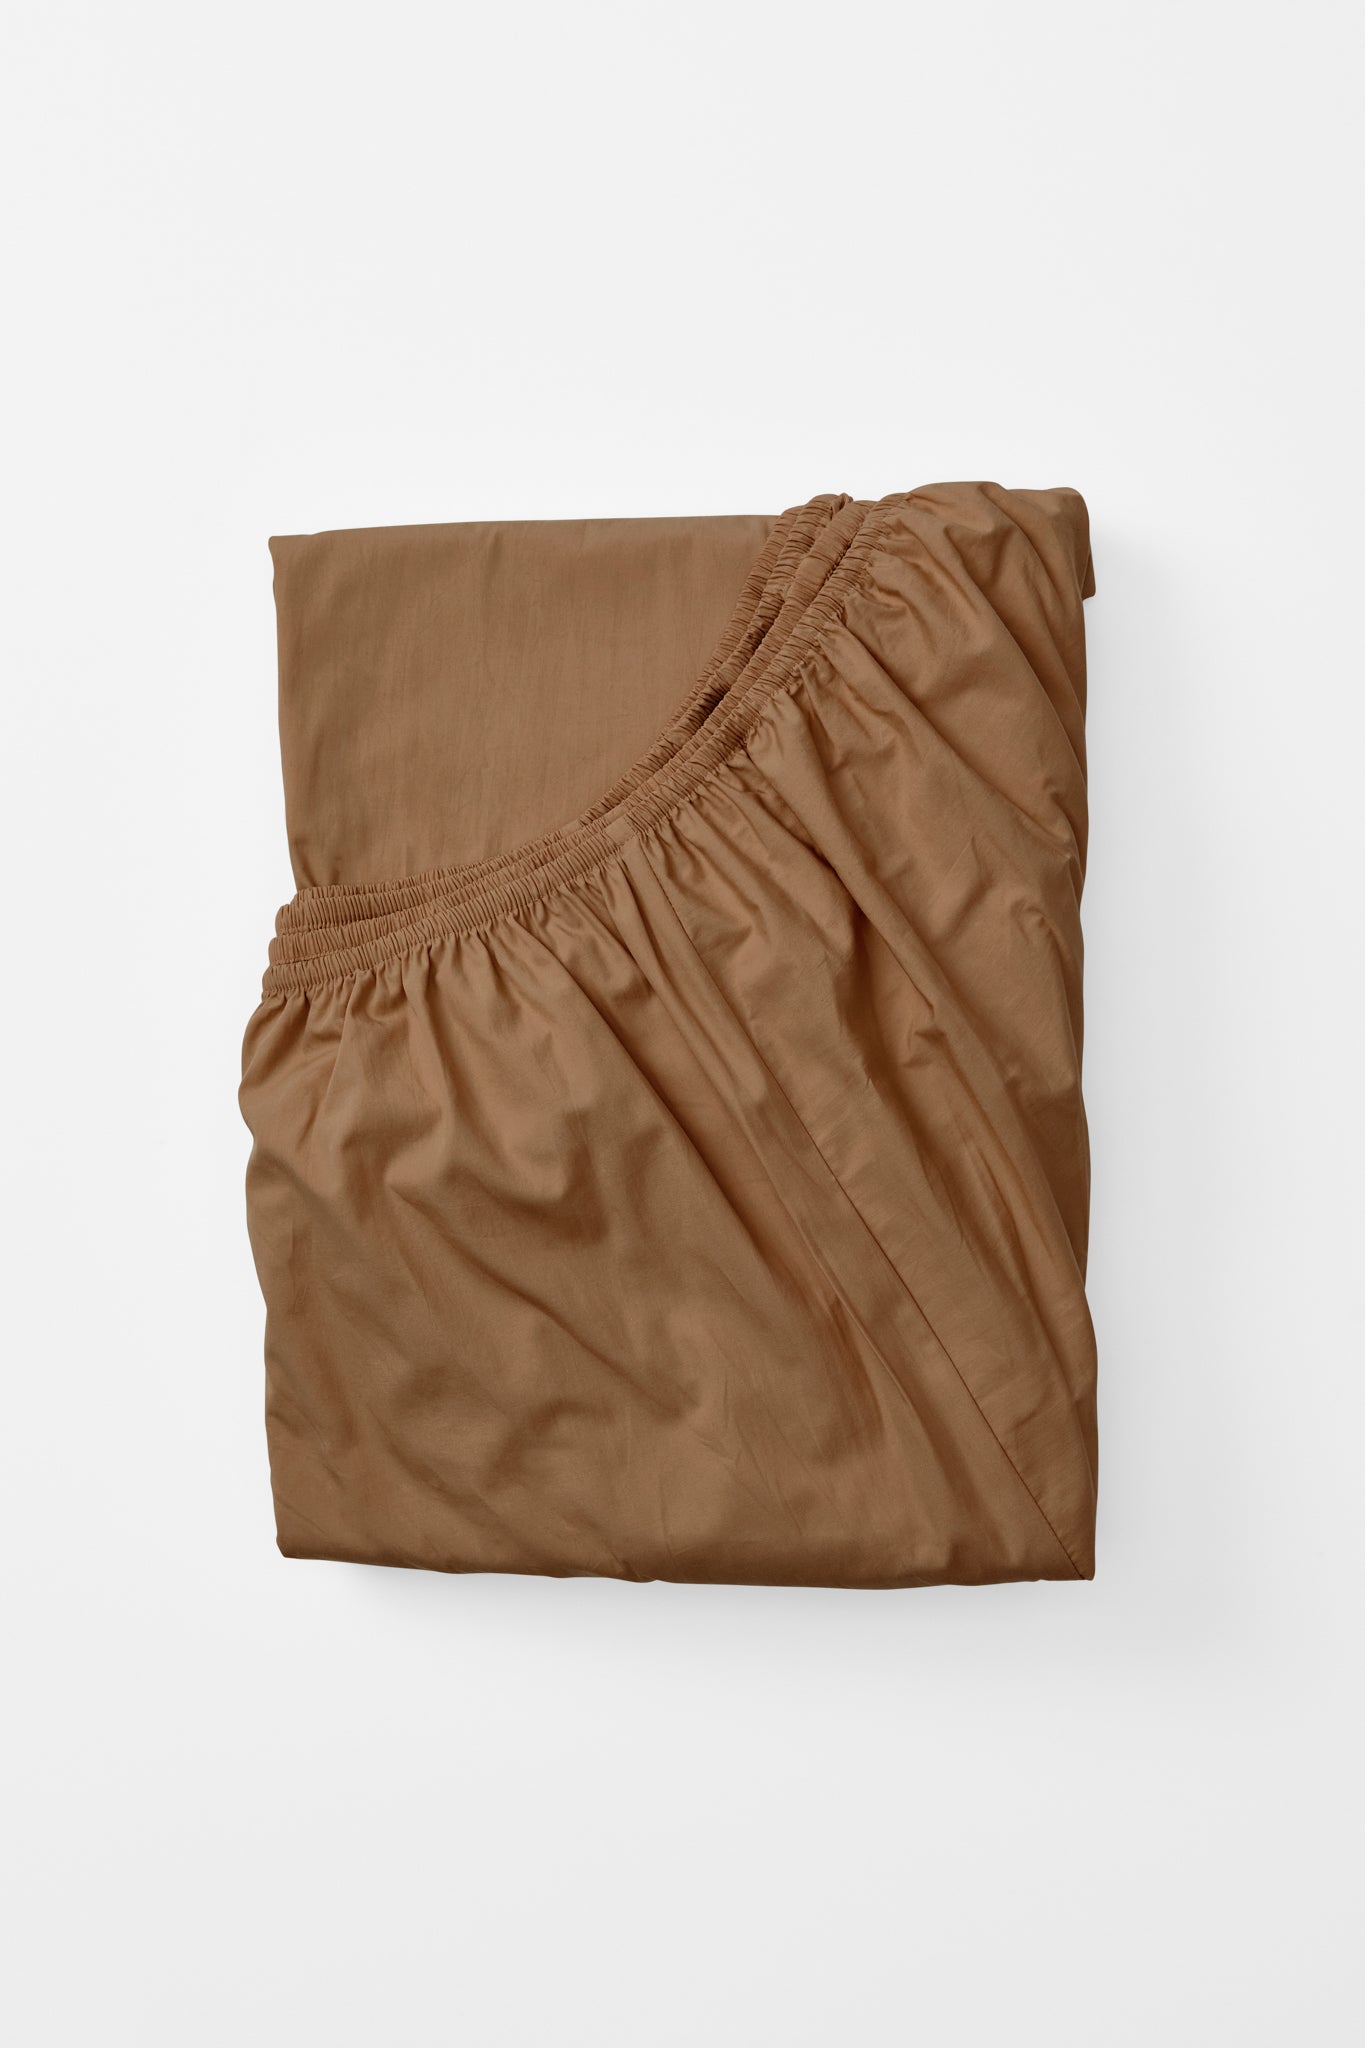 Fitted Sheet in Carob